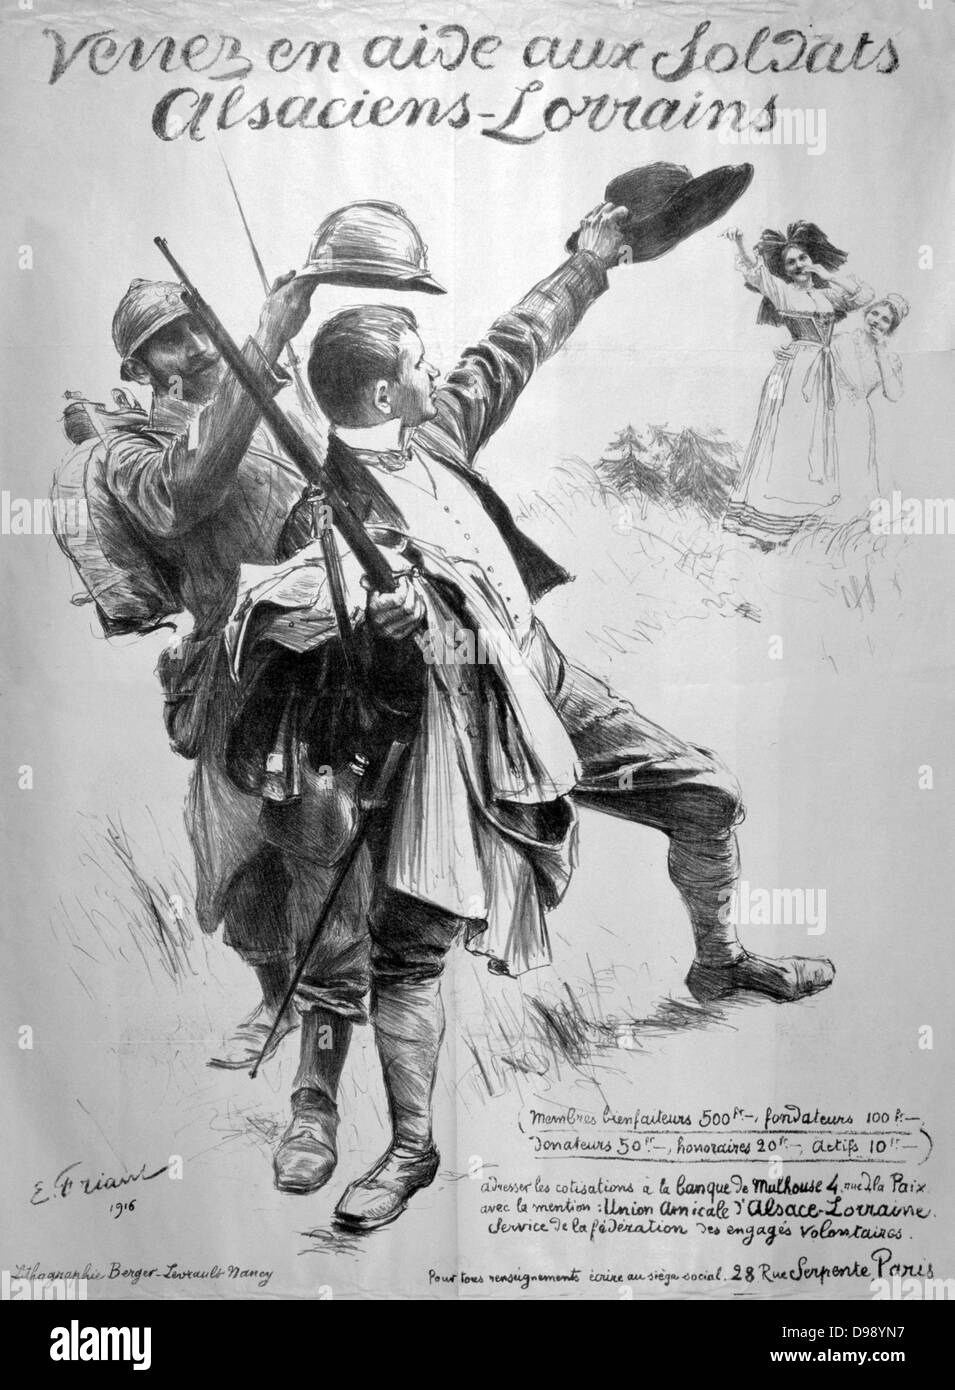 World War I 1914-1918. French poster calling for aid for Alsace-Lorraine, 1916.. Stock Photo